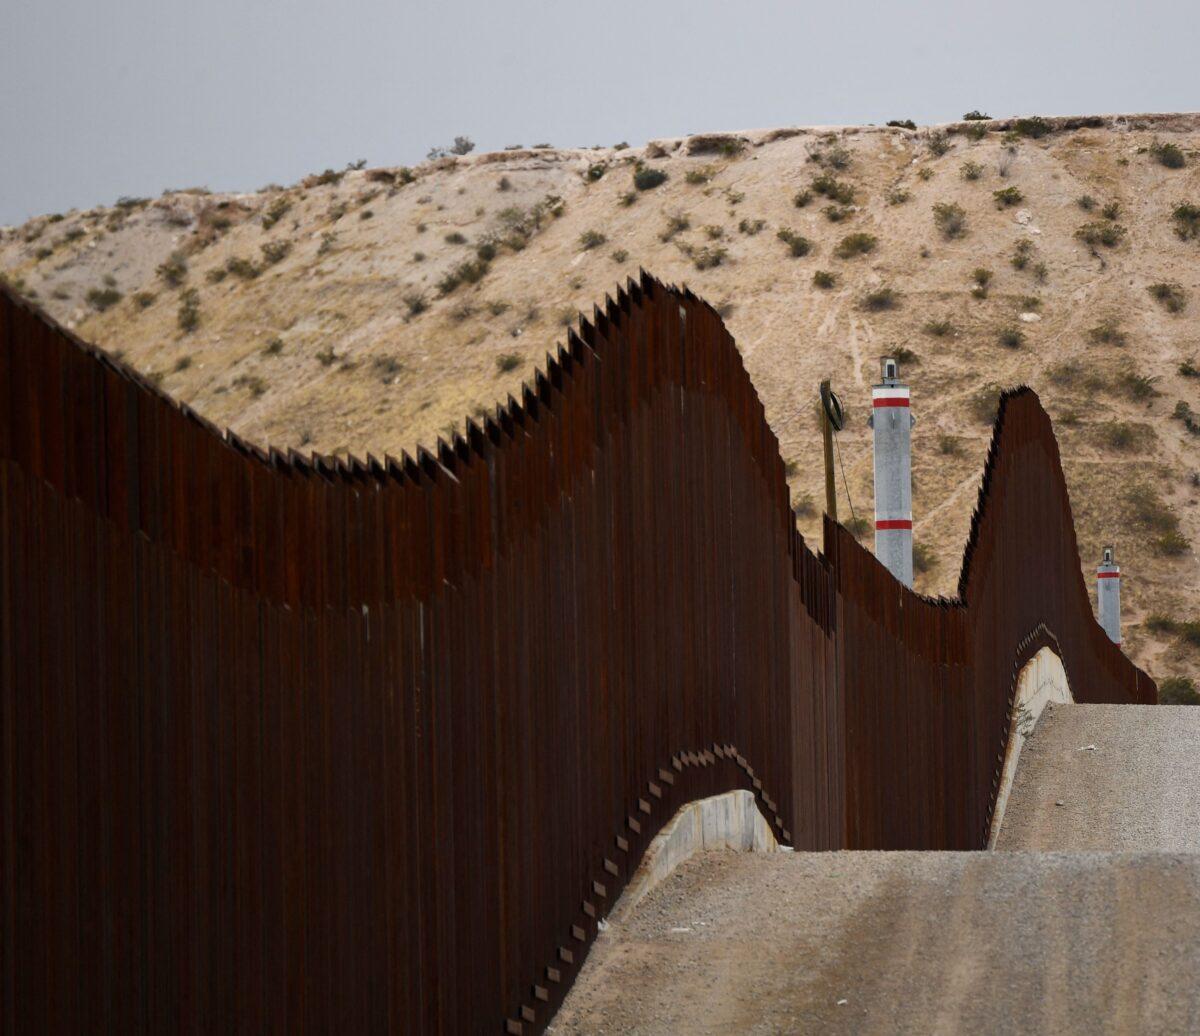 A U.S. Border Patrol vehicle sits next to a border wall in the El Paso Sector along the U.S.-Mexico border between New Mexico and Chihuahua state, in Sunland Park, New Mexico, on Dec. 9, 2021. (Patrick T. Fallon/AFP via Getty Images)